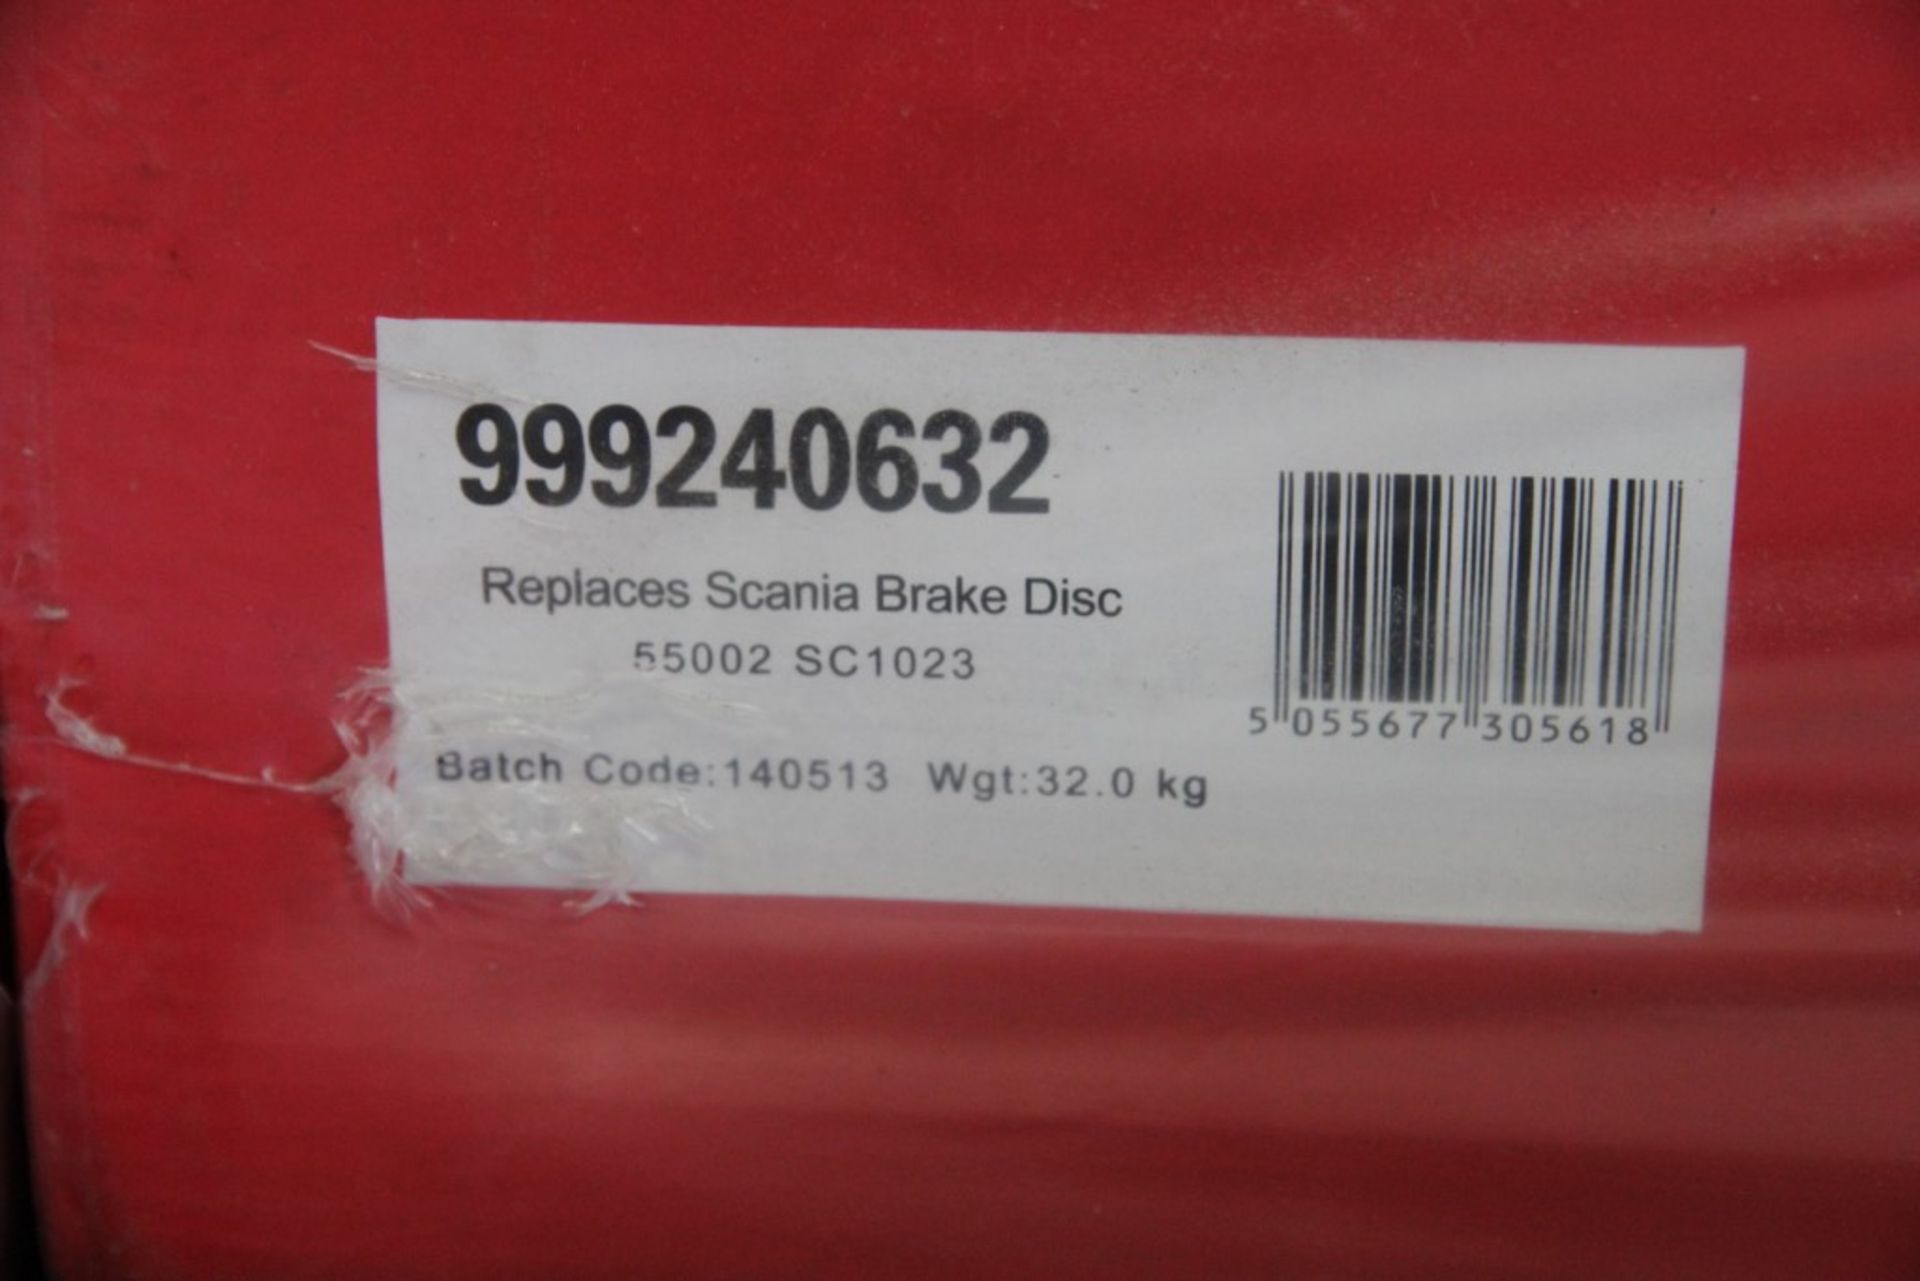 Scania / Montracon Brake Disc (6 of), Scania P/N: 55002 / SC1023 - Image 2 of 2